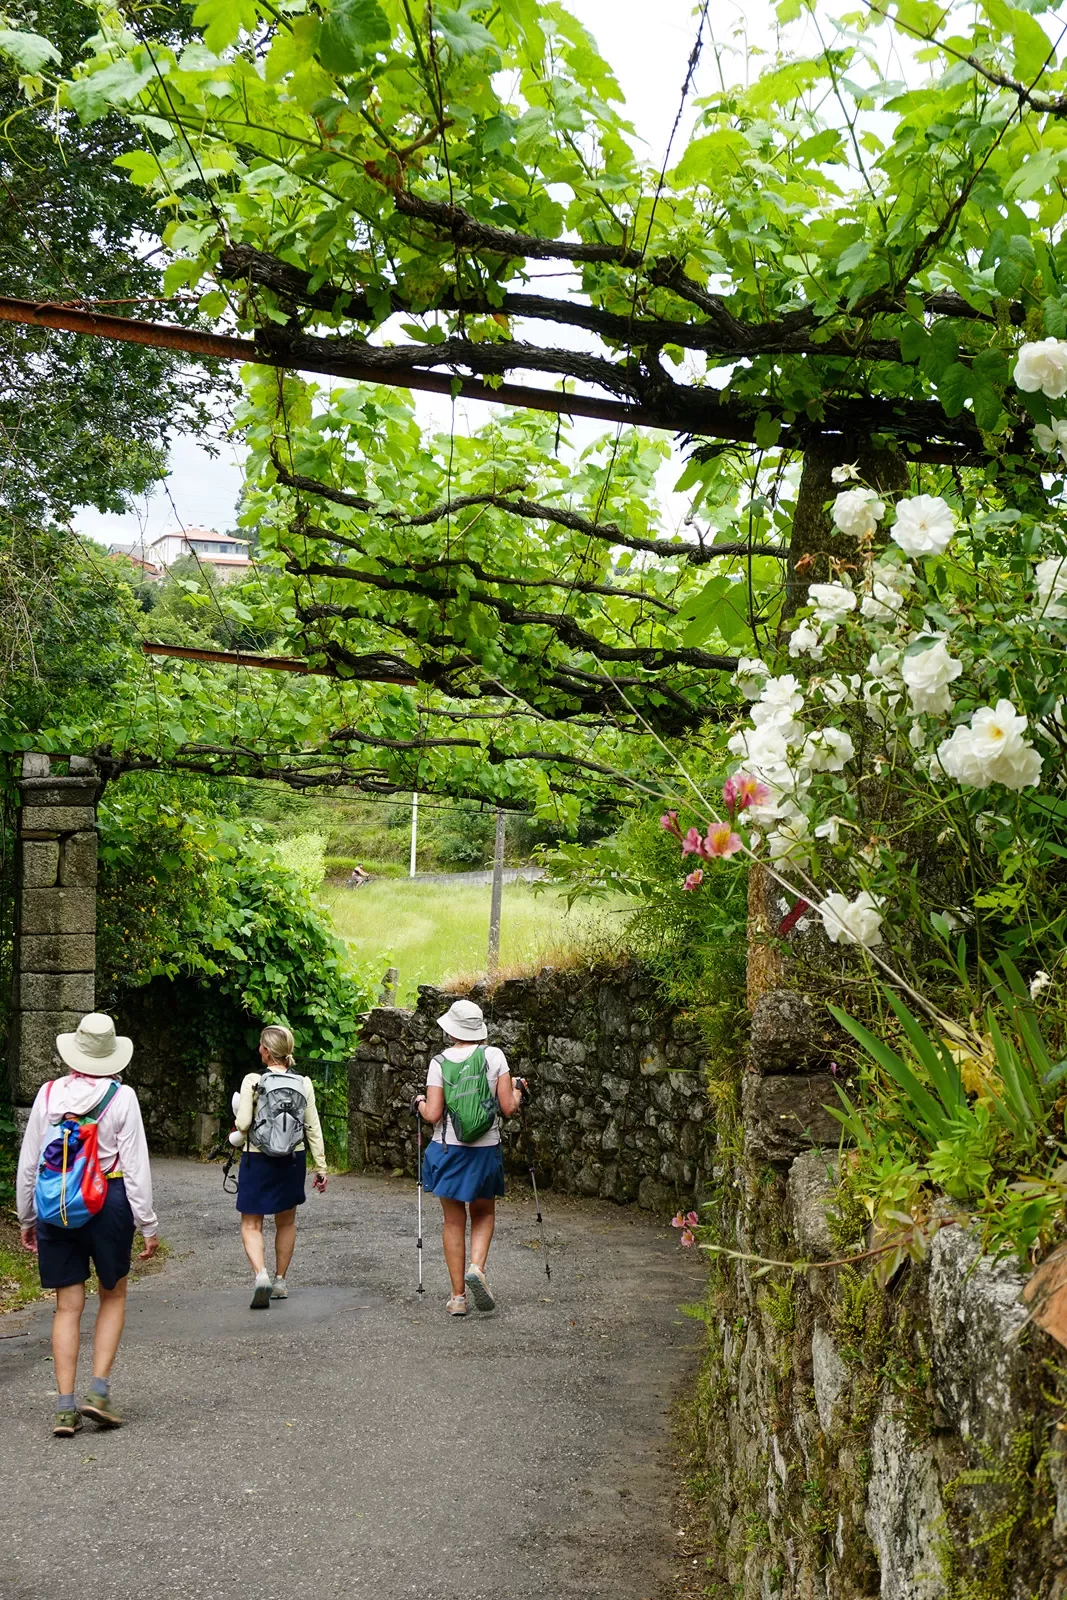 Hikers walking along a tree and flower shaded path